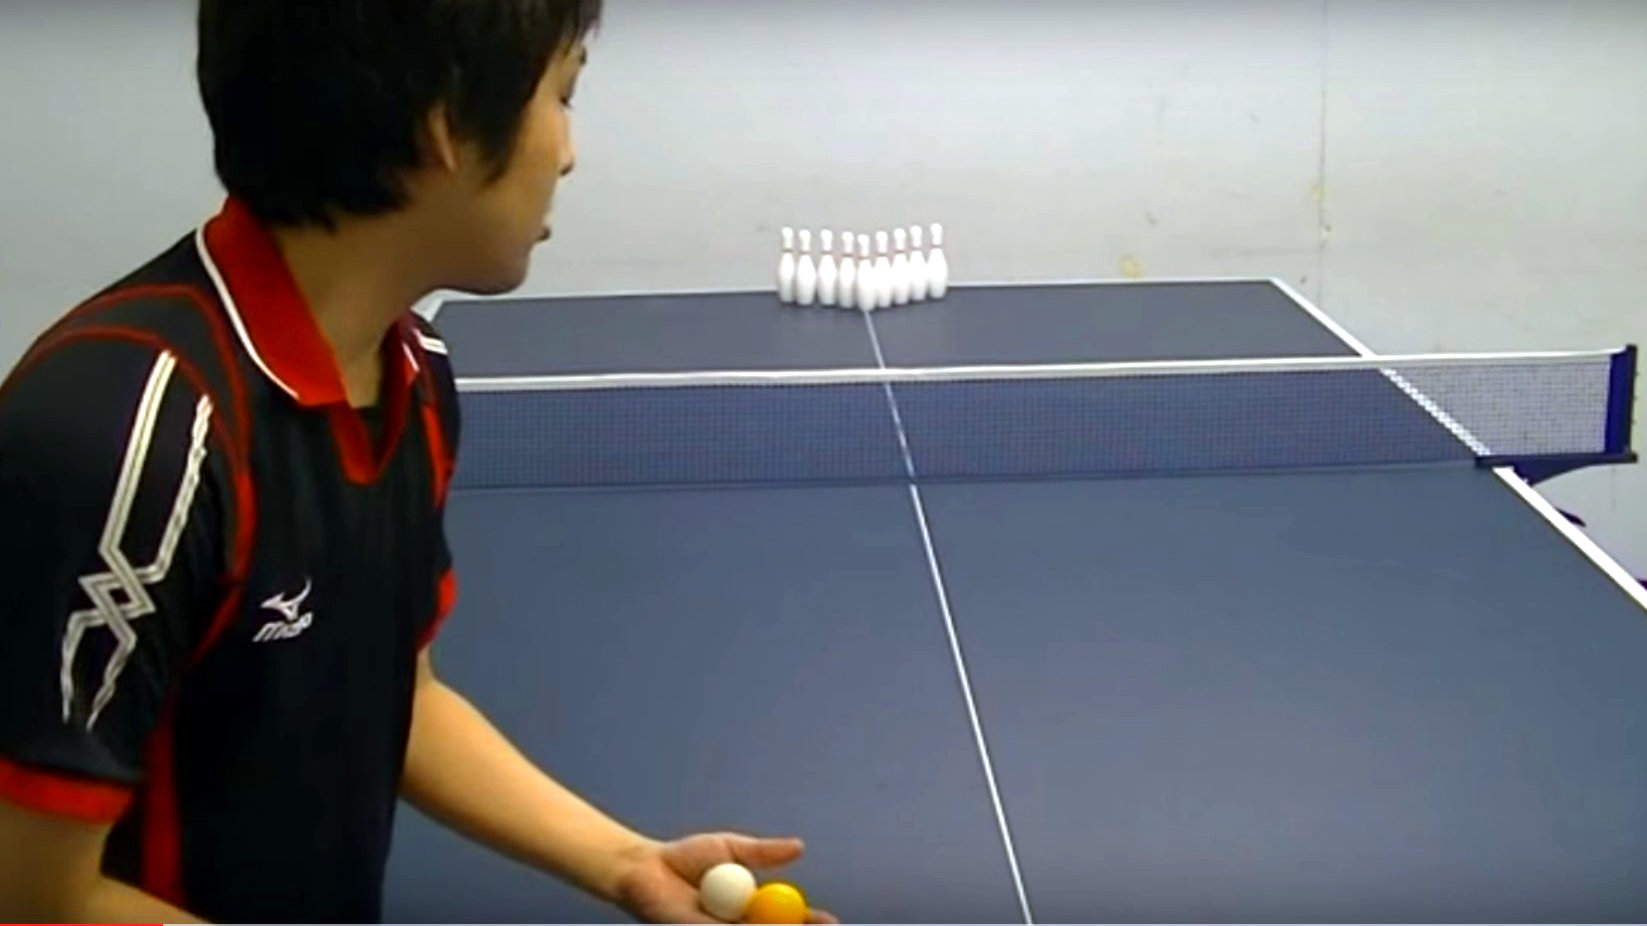 Ping Pong-Extreme